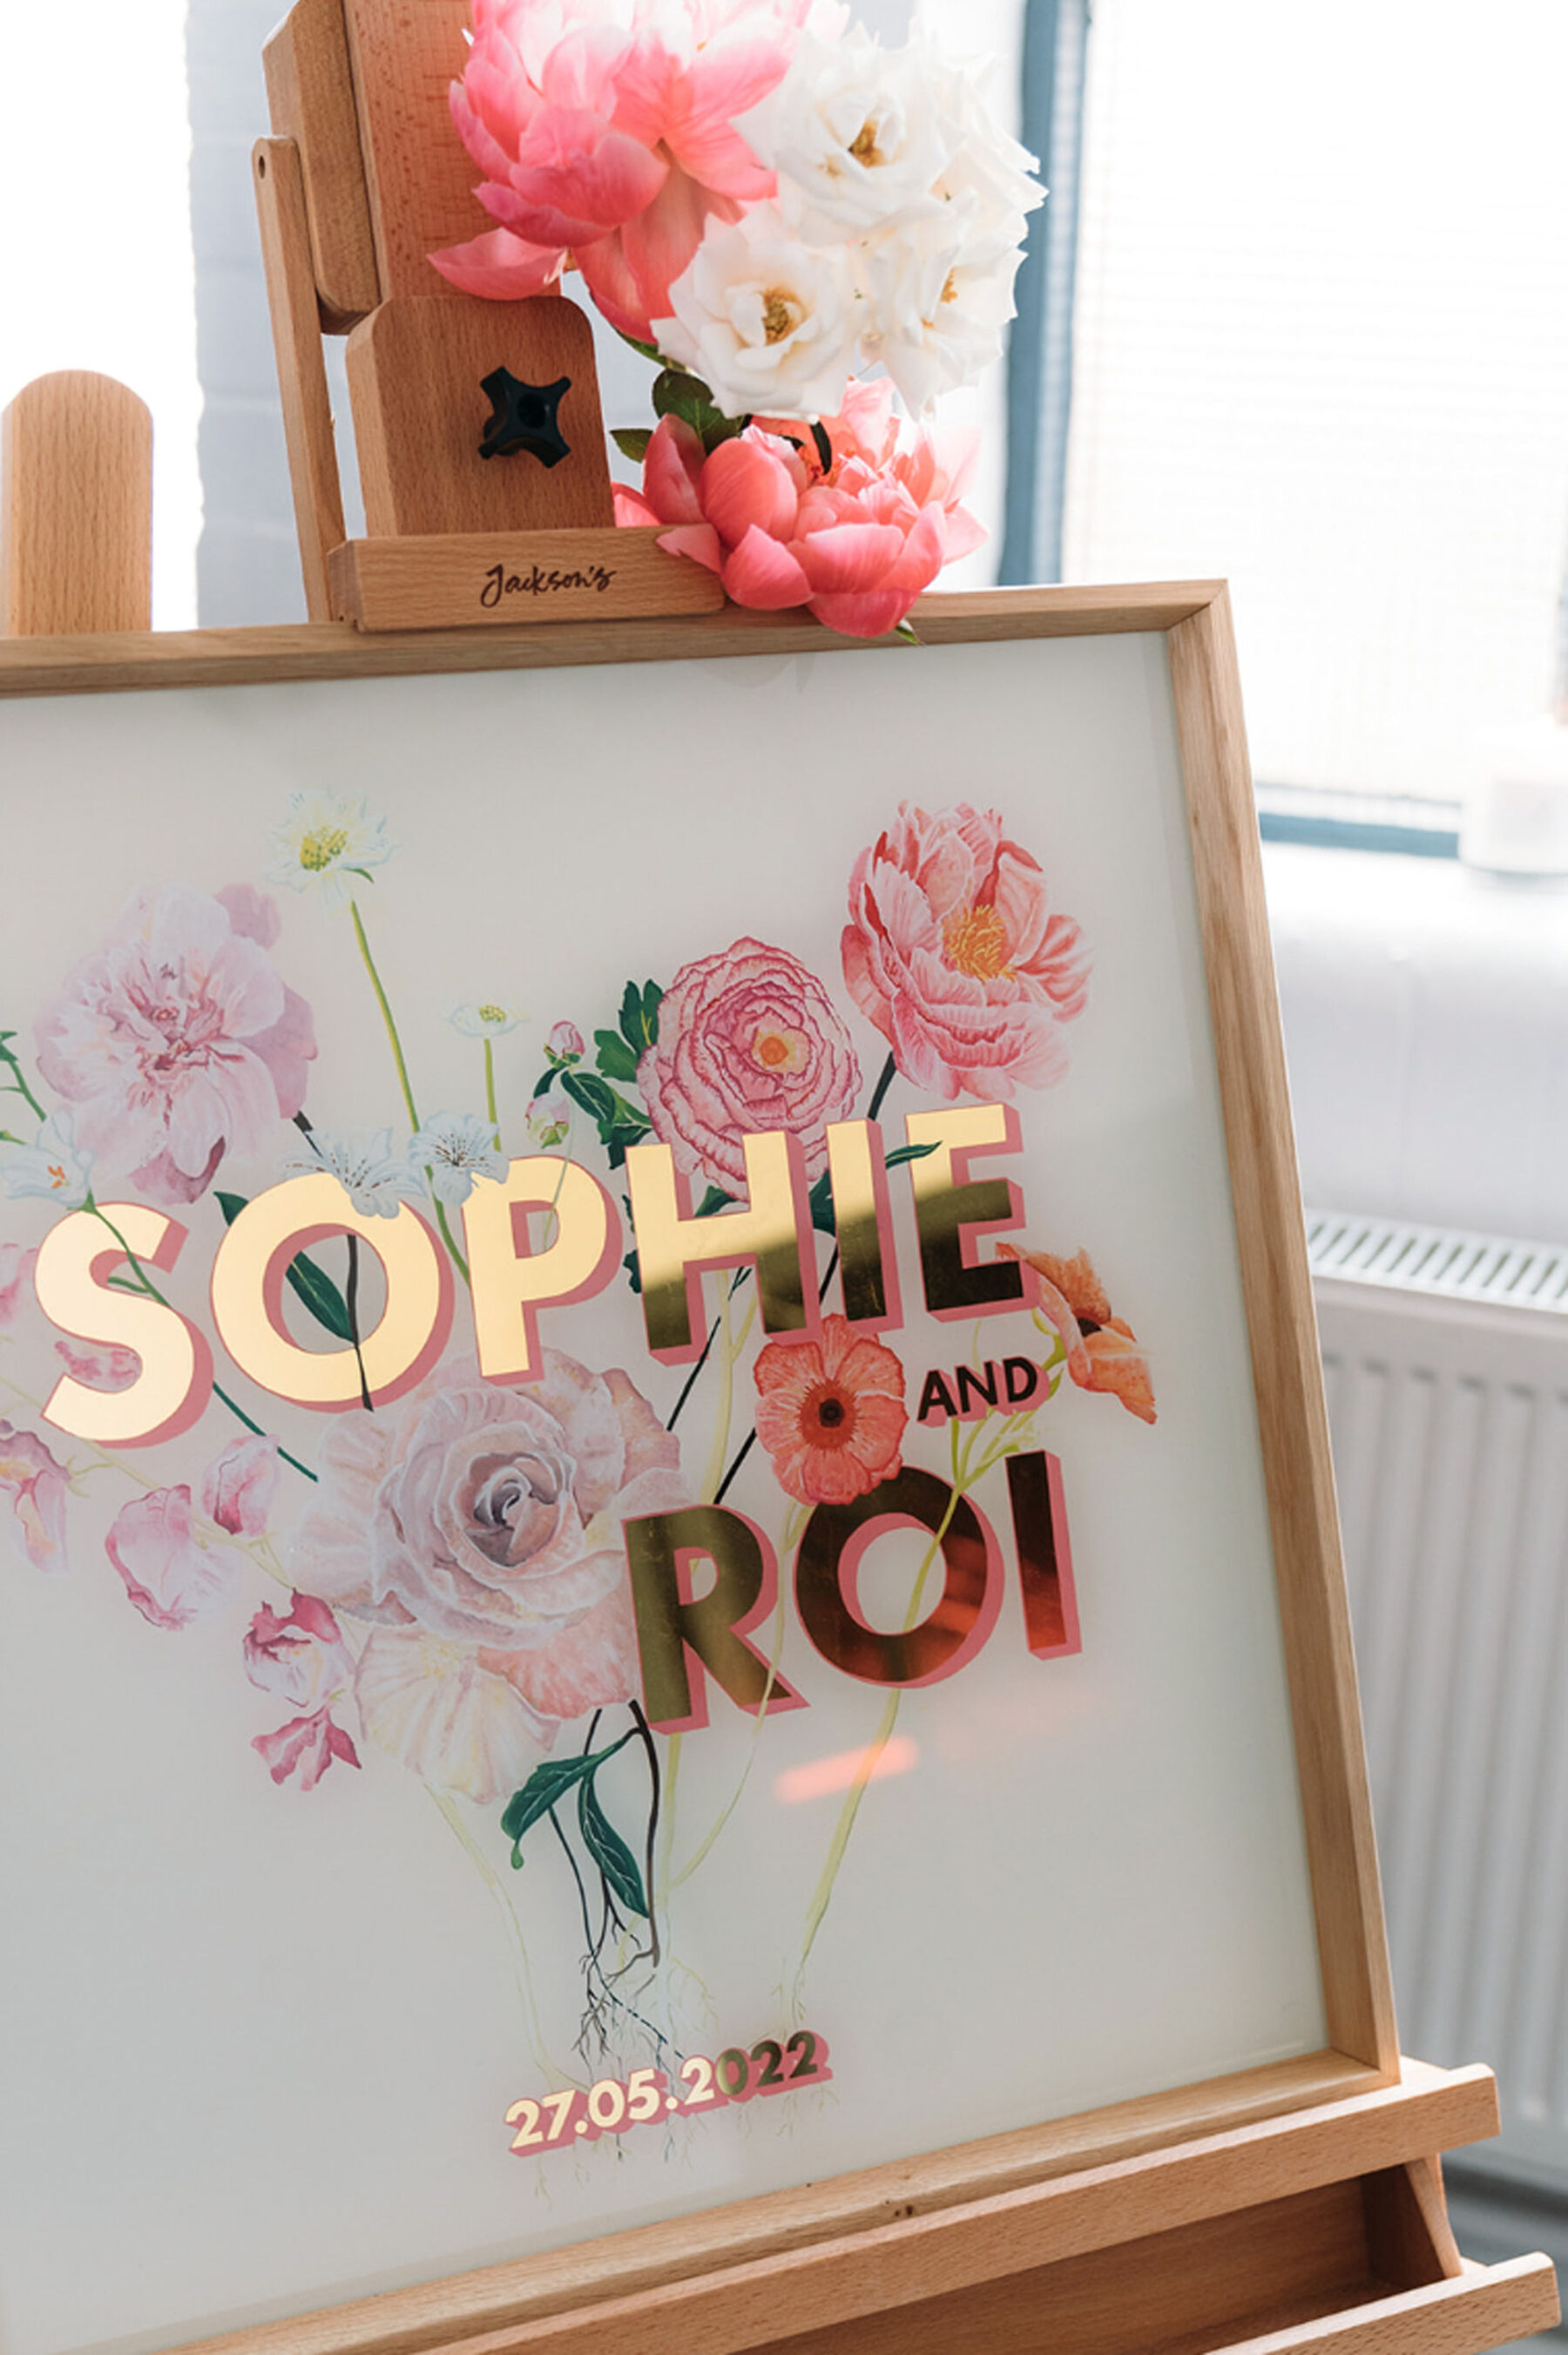 Professional wedding signs + signage in gold lettering with floral illustrations.